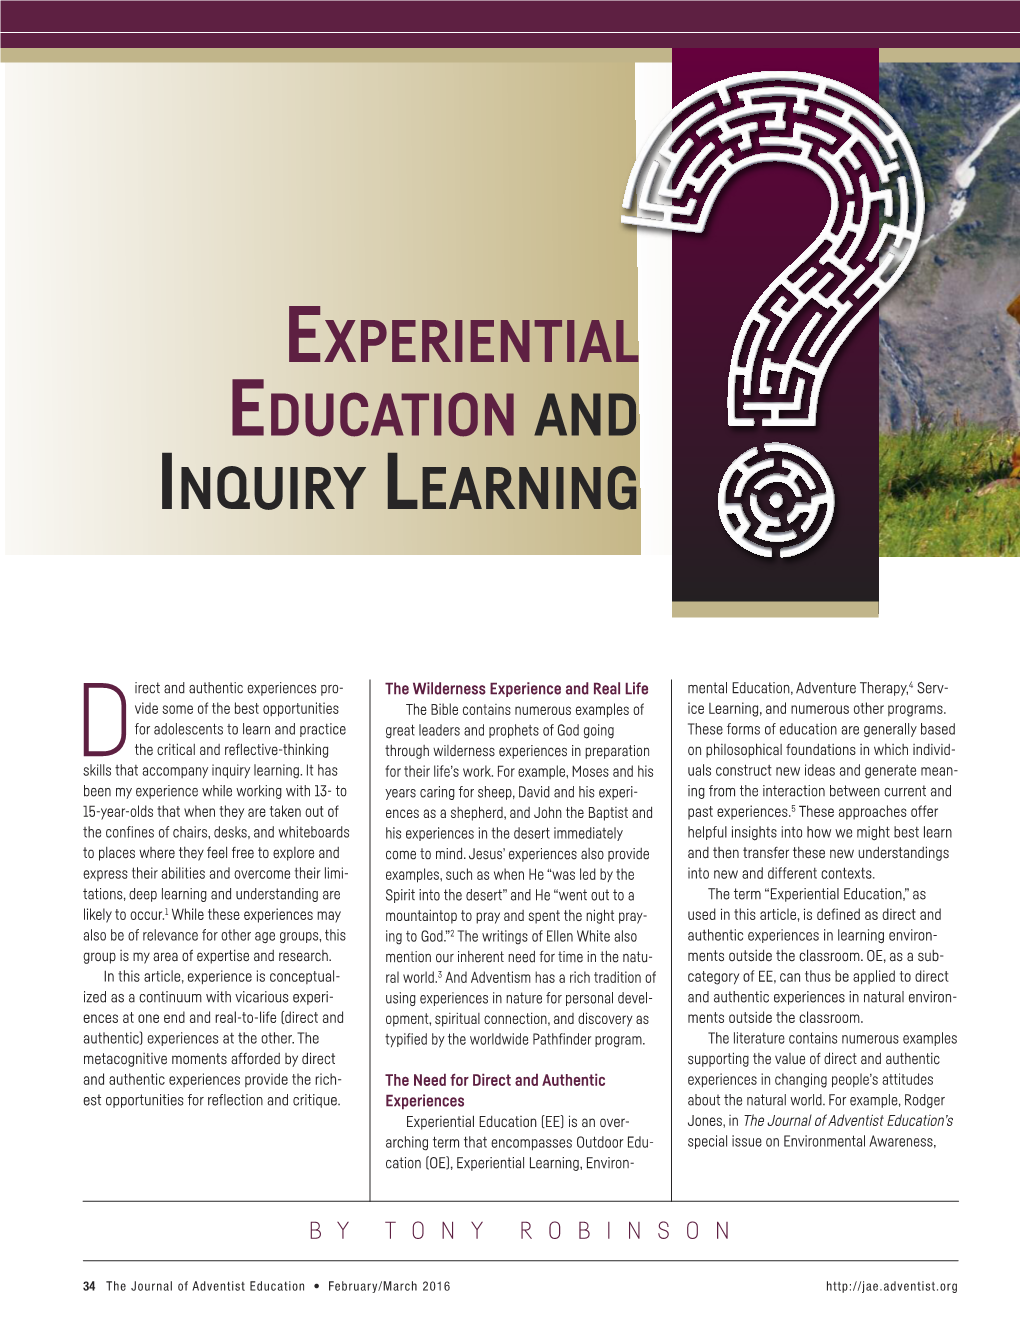 Experiential Education and Inquiry LEARNING